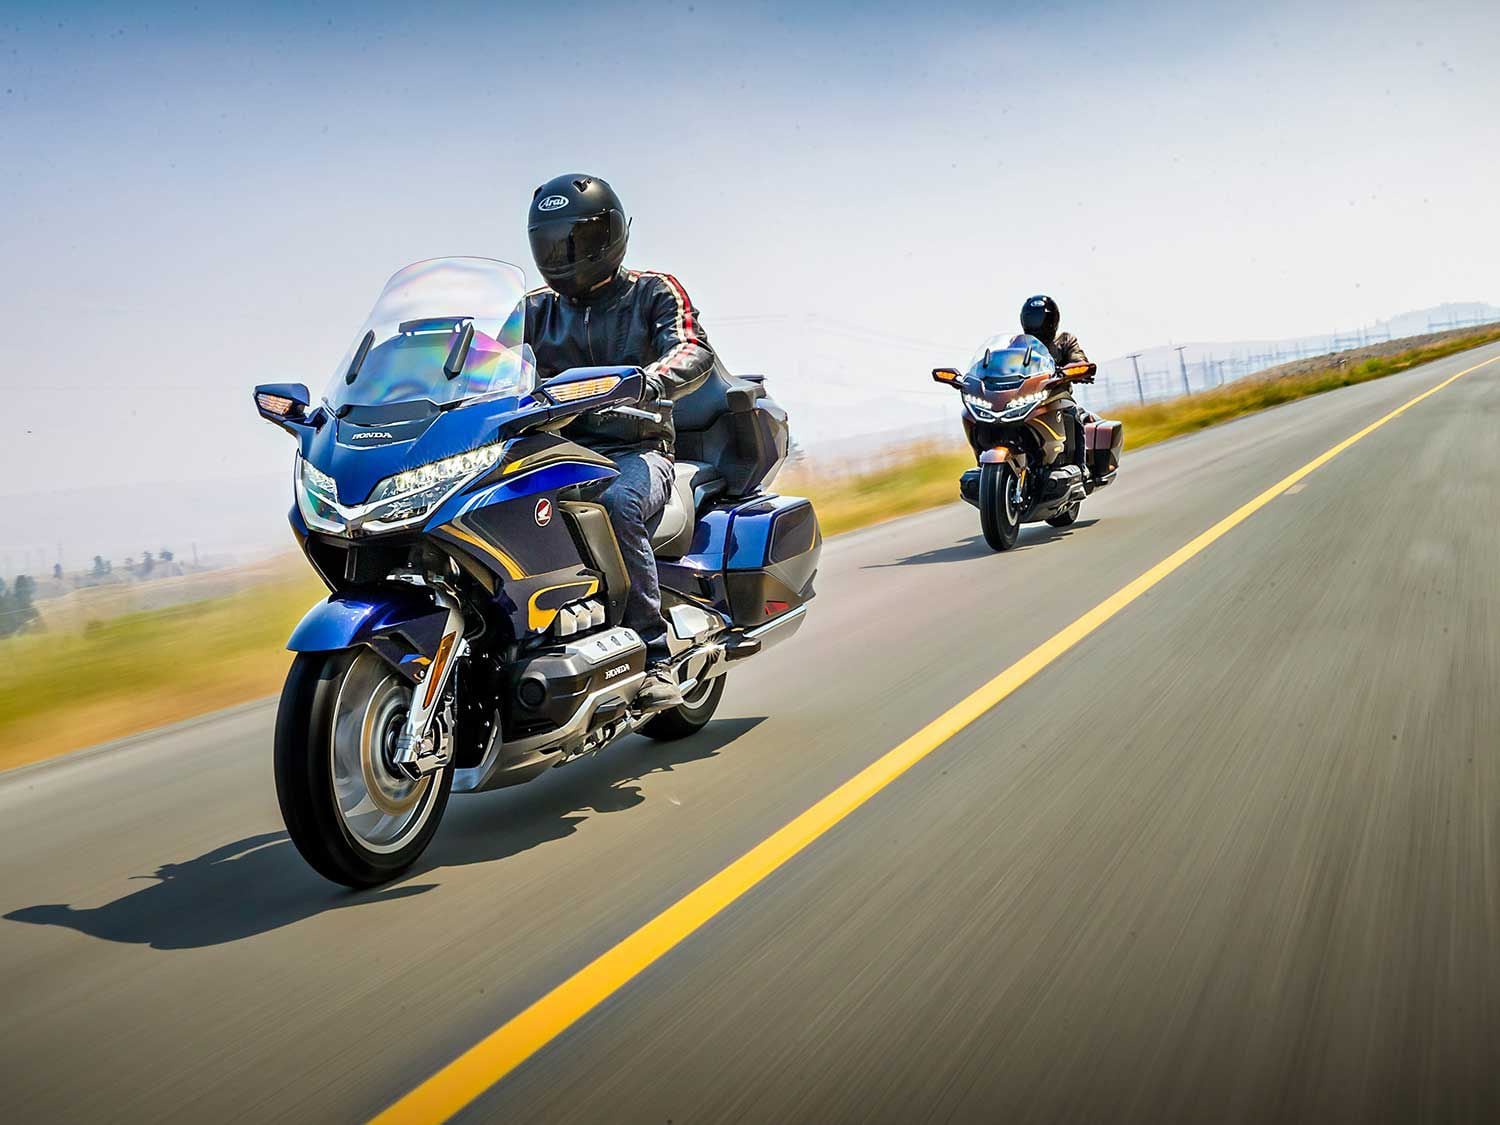 The Honda Gold Wing has been among the best touring bikes in existence since it first came on the market in the late 1970s.